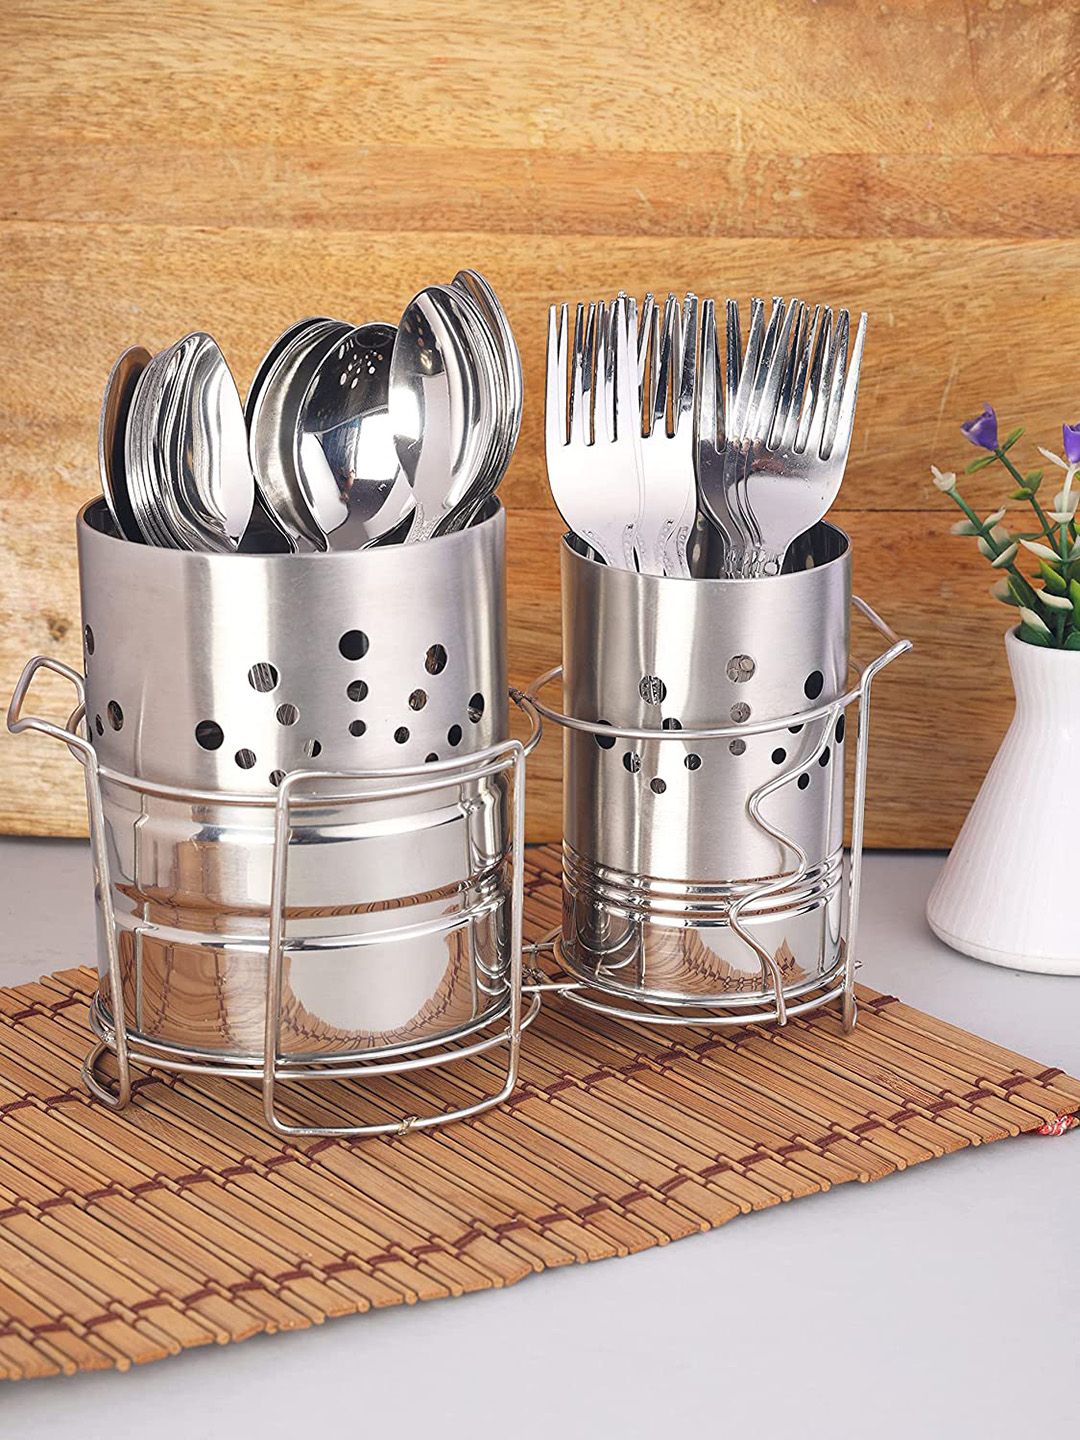 ZEVORA Adults Silver-Toned Stainless Steel Cutlery Holder Stand With 12 Spoons & 12 Forks Price in India